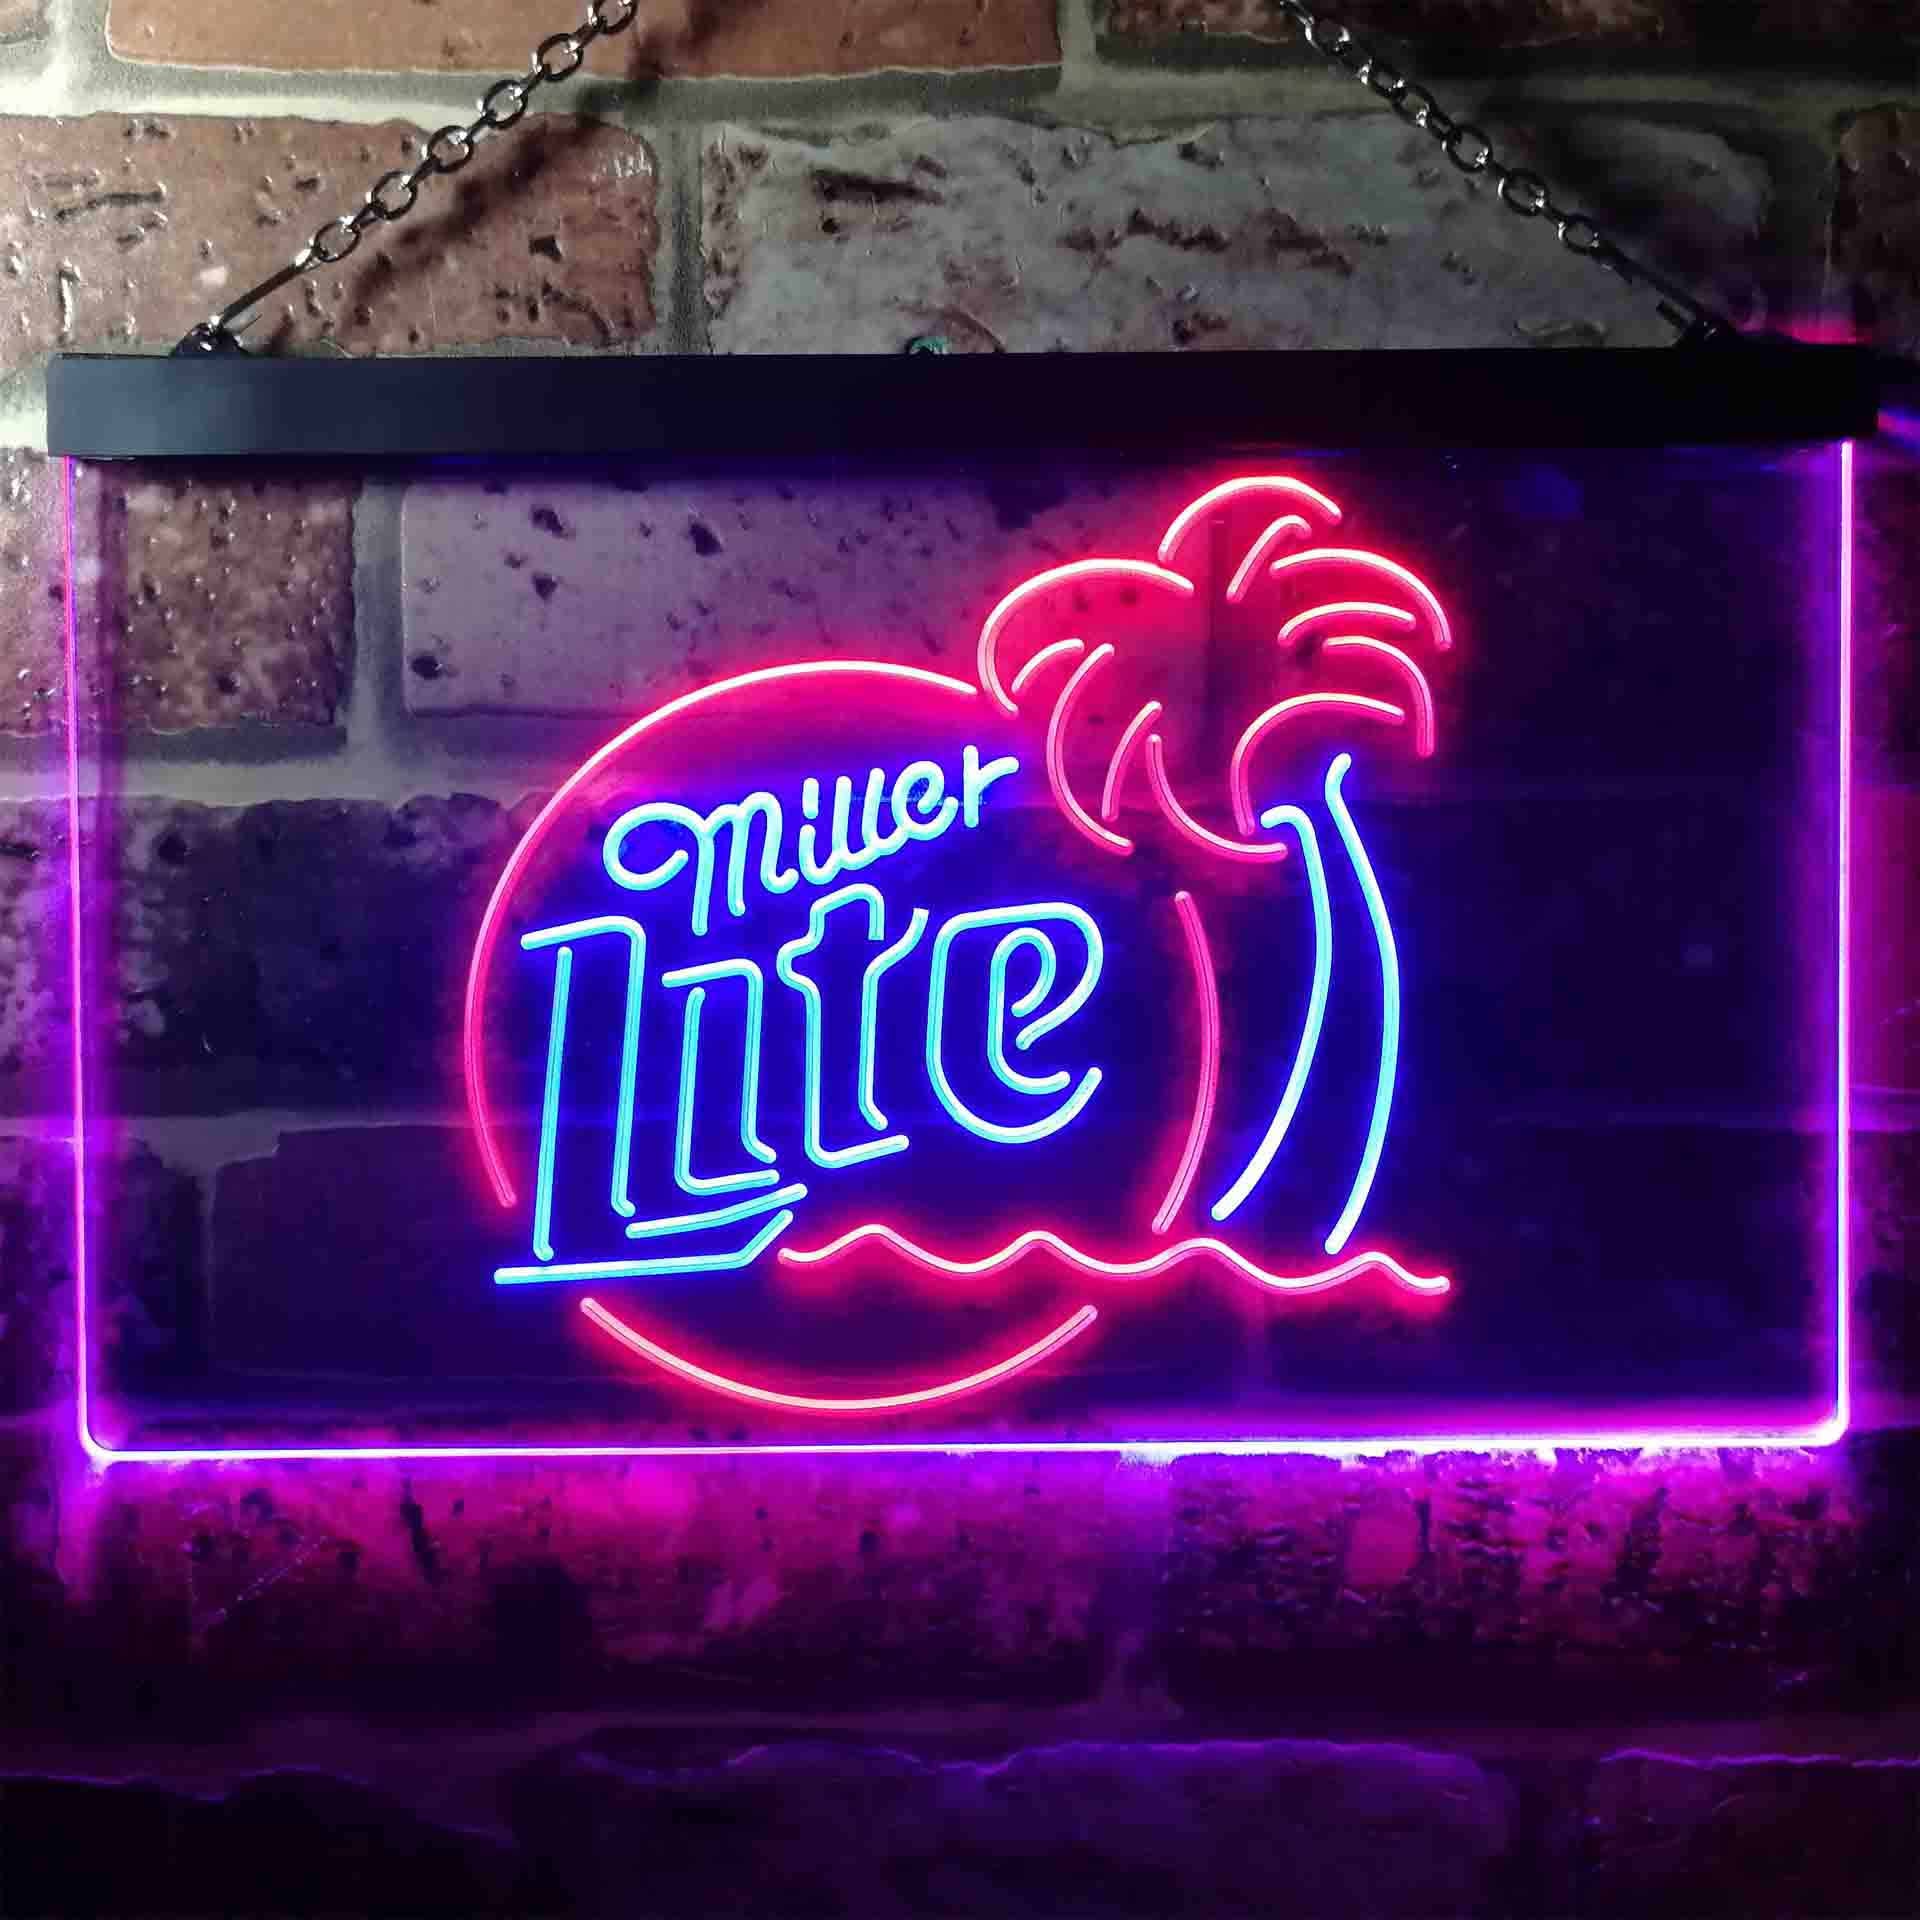 Miller Palm Tree Neon LED Sign